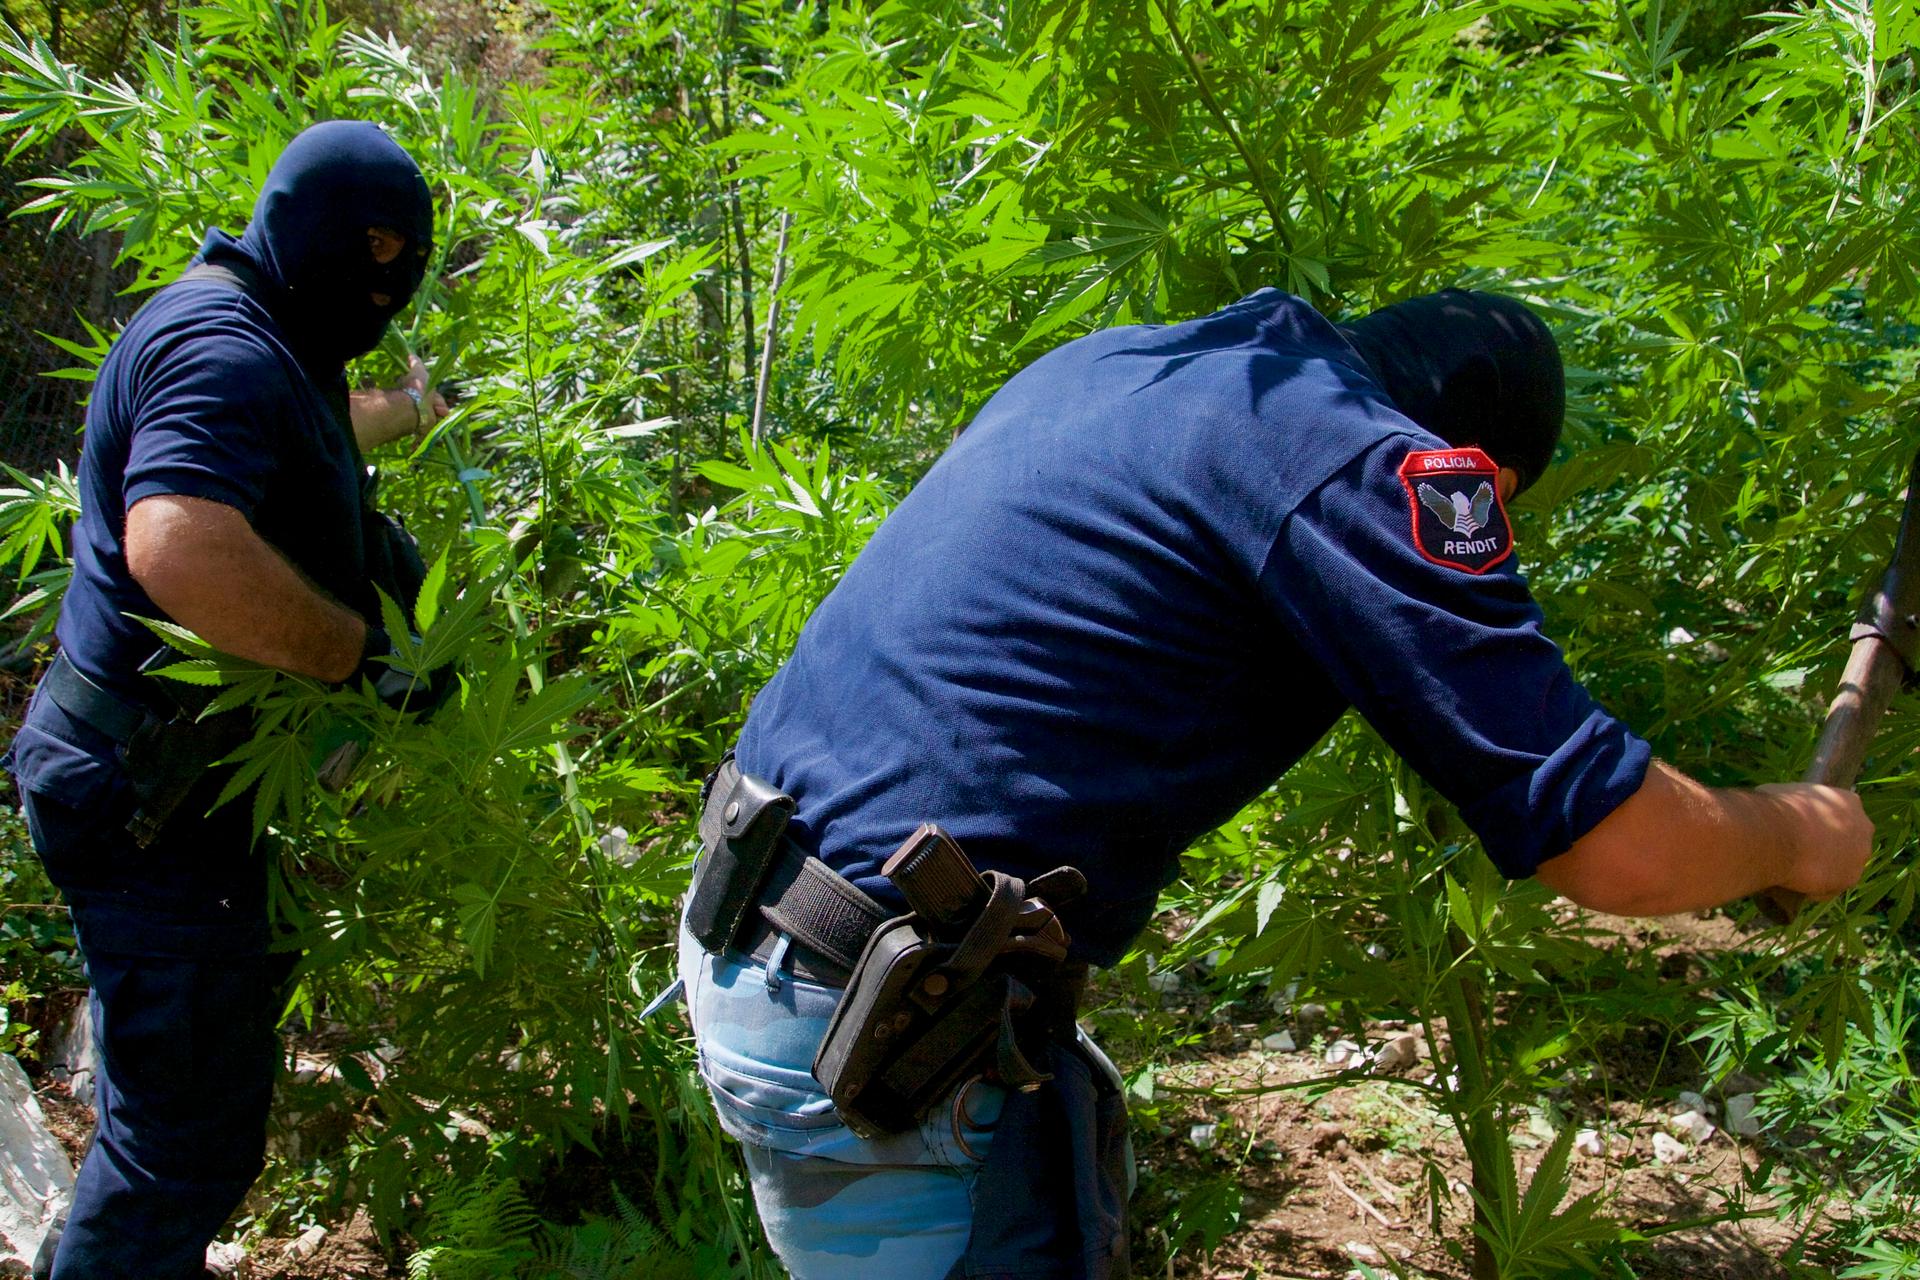 Albanian police officers slash cannabis plants. Most of it will be burned. A small amount will be retained for evidence.